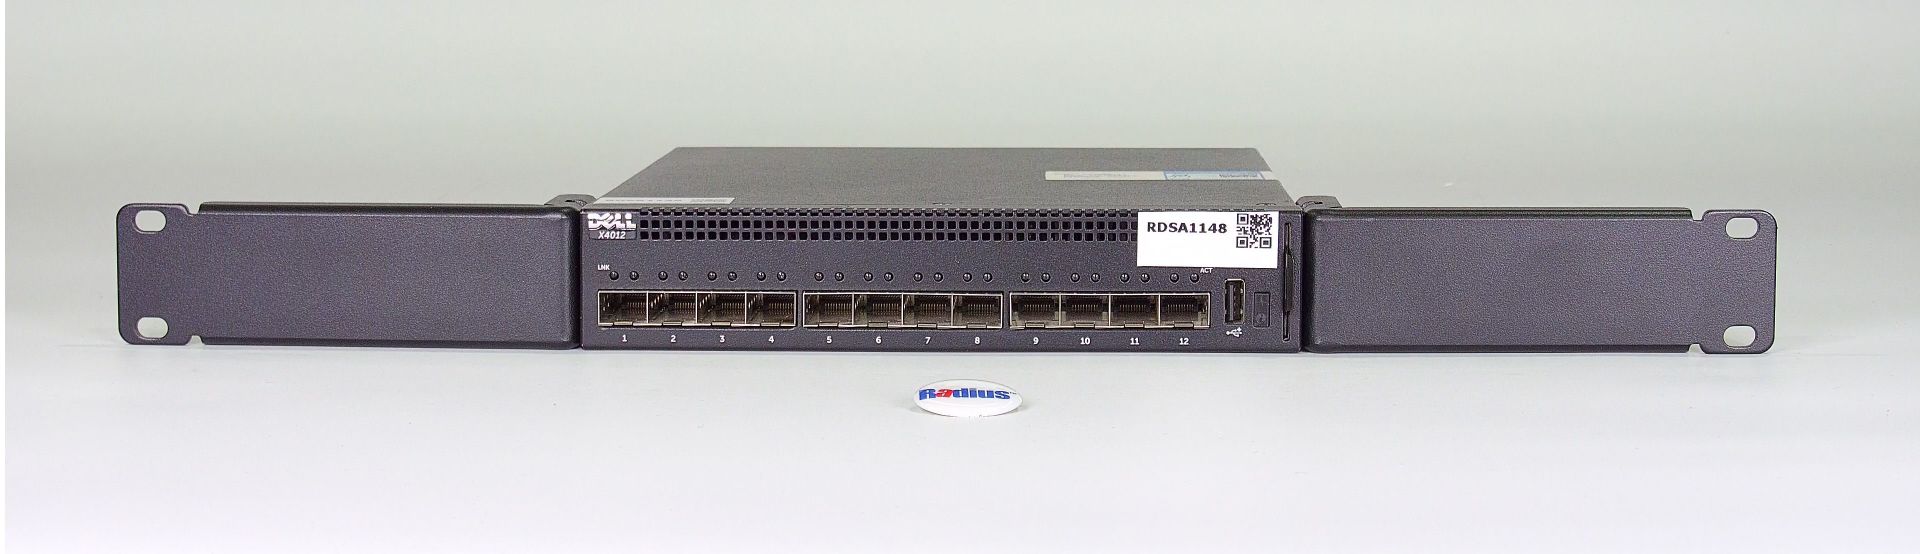 Dell Networking X4012 Switch